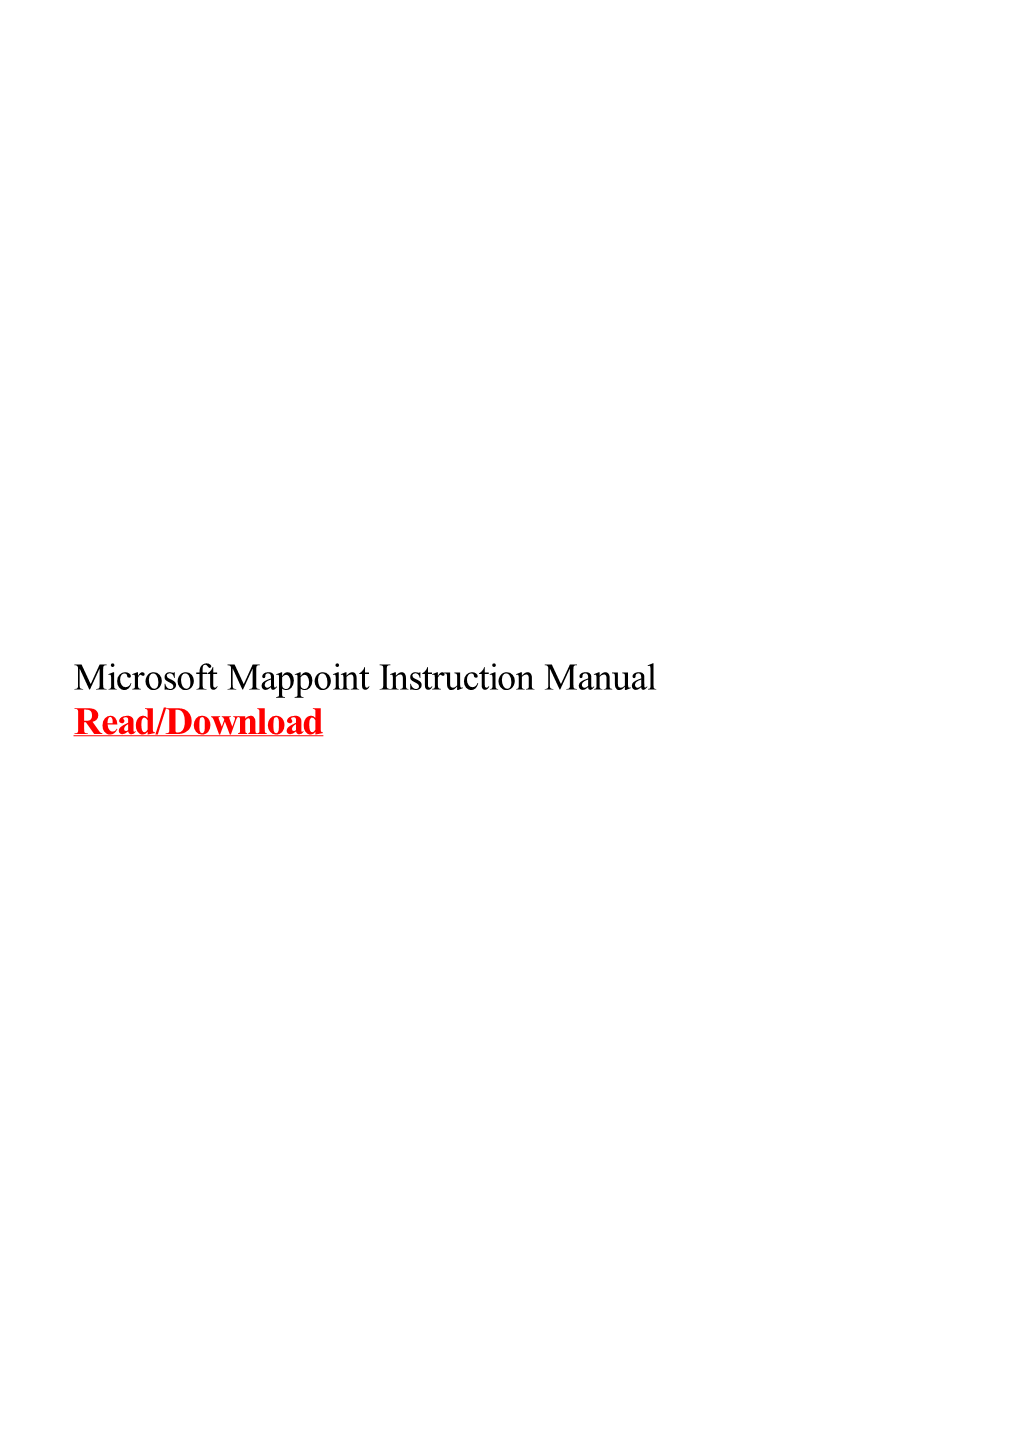 Microsoft Mappoint Instruction Manual